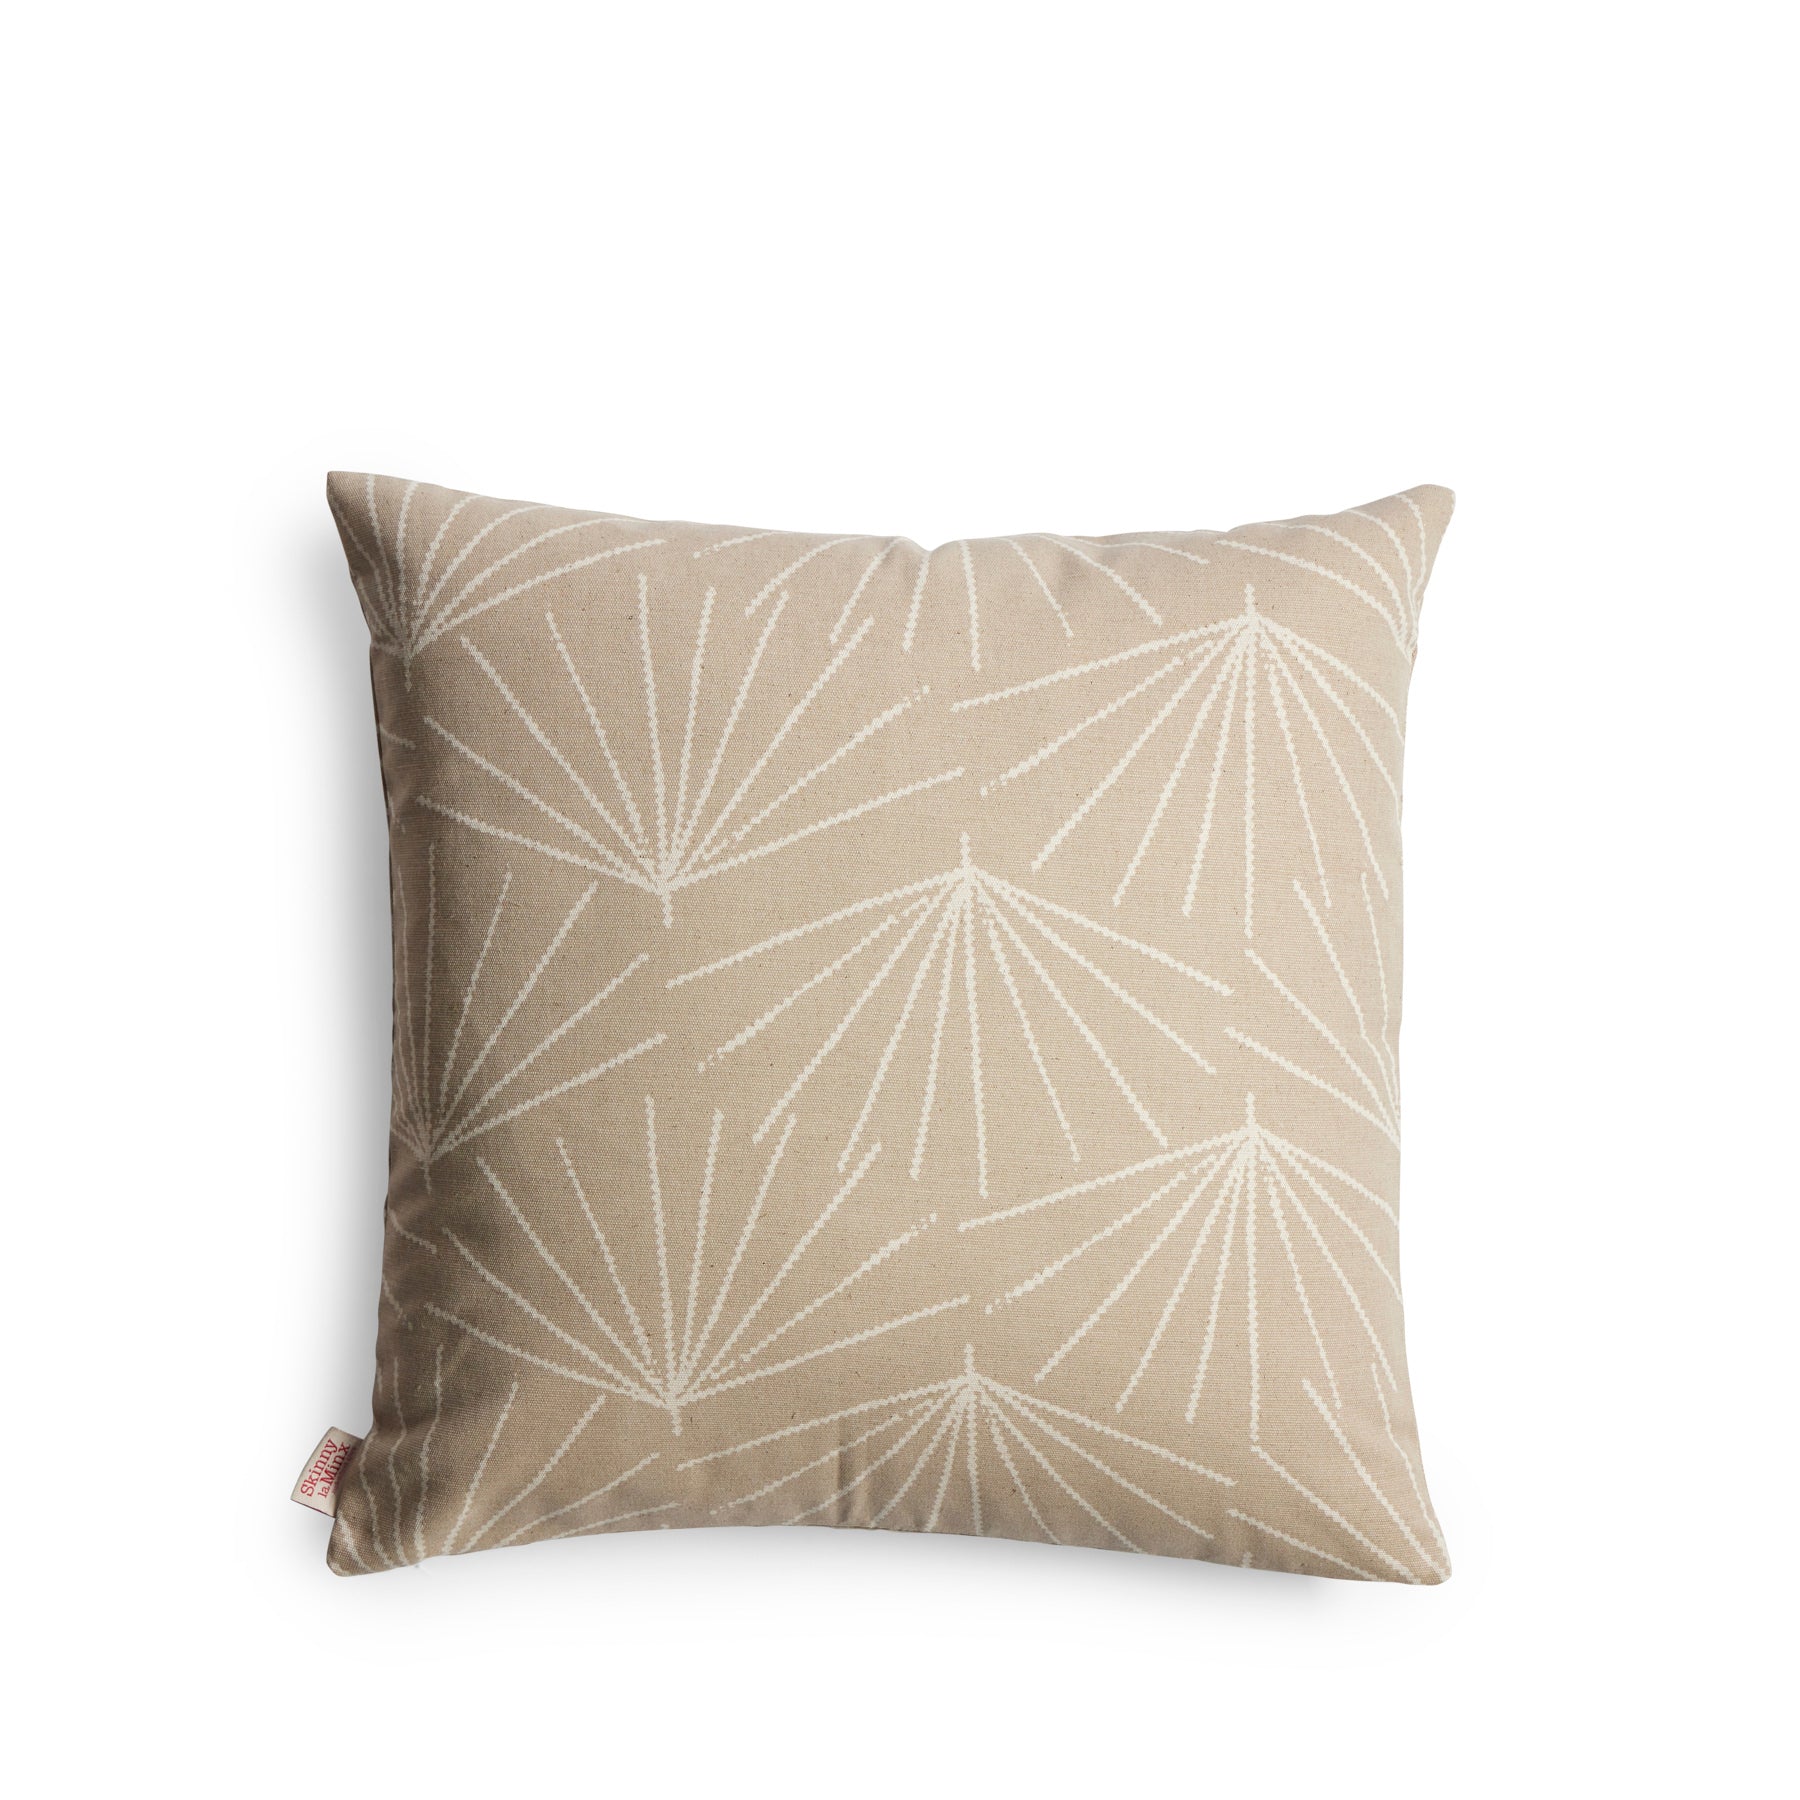 Palmetto Cushion in Sand Zoom Image 1